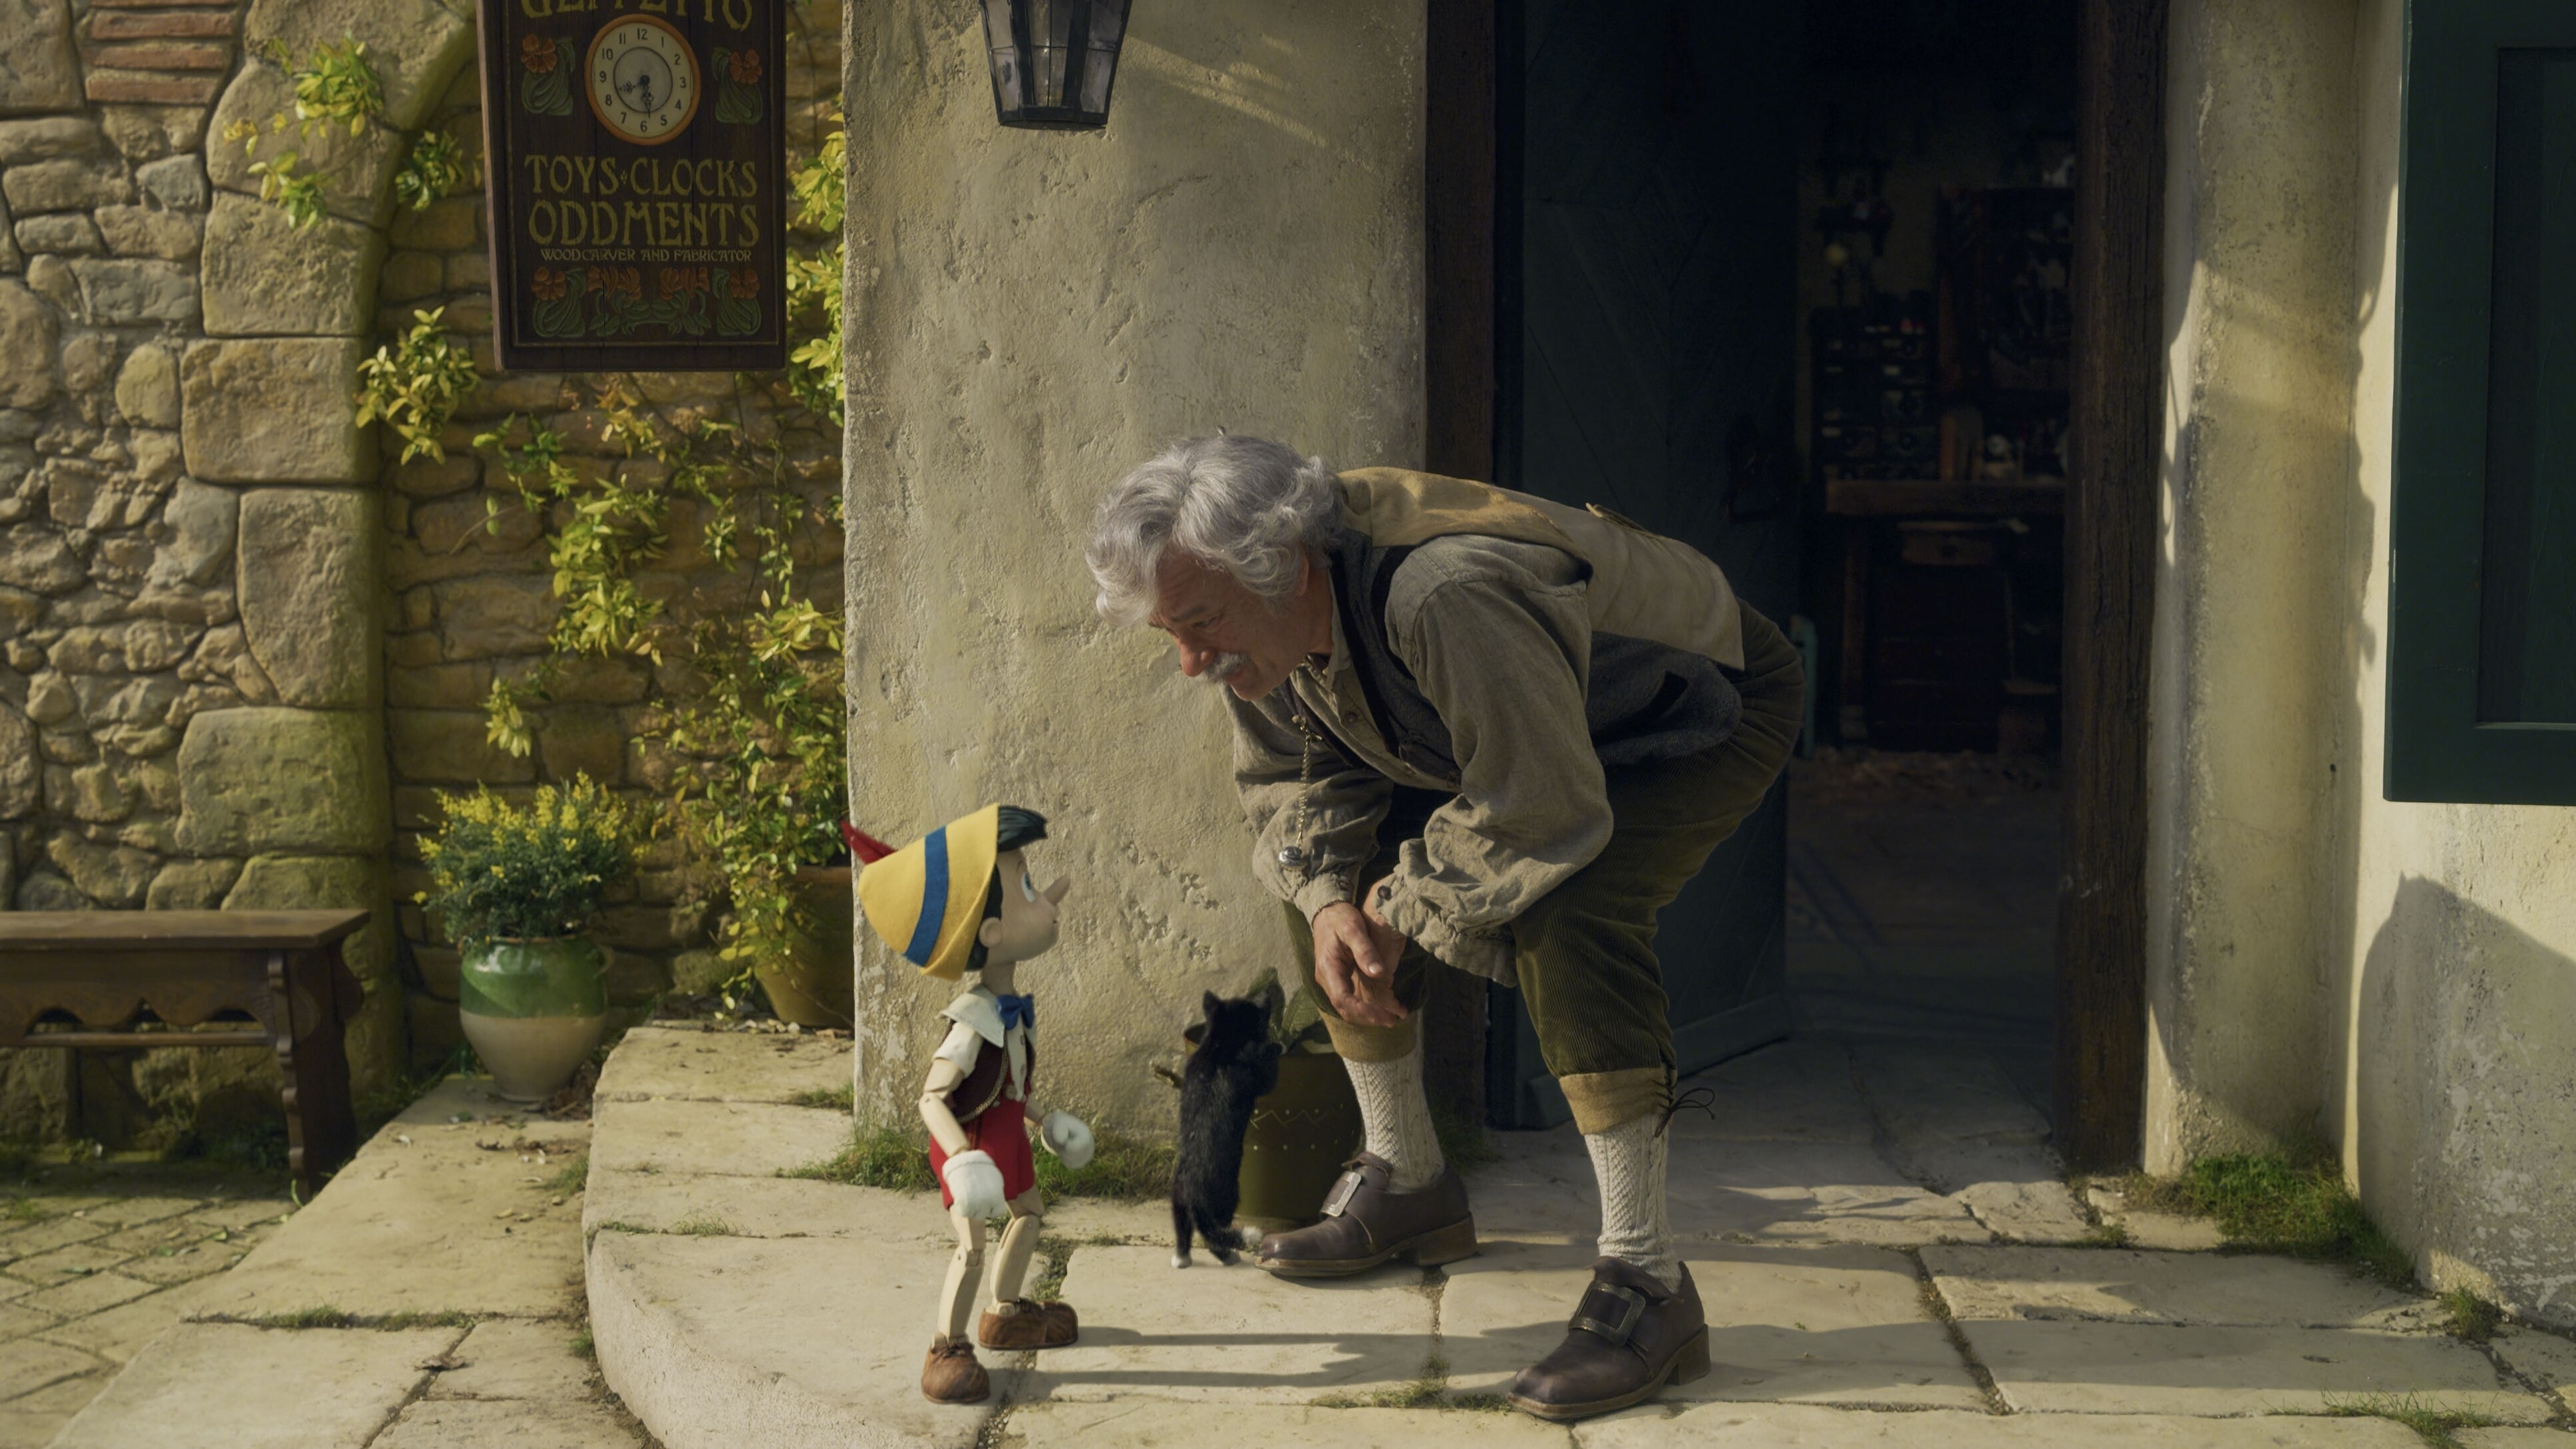 (L-R): Pinocchio (voiced by Benjamin Evan Ainsworth), Figaro, and Tom Hanks as Geppetto in Disney's live-action PINOCCHIO, exclusively on Disney+. Photo courtesy of Disney Enterprises, Inc. © 2022 Disney Enterprises, Inc. All Rights Reserved.